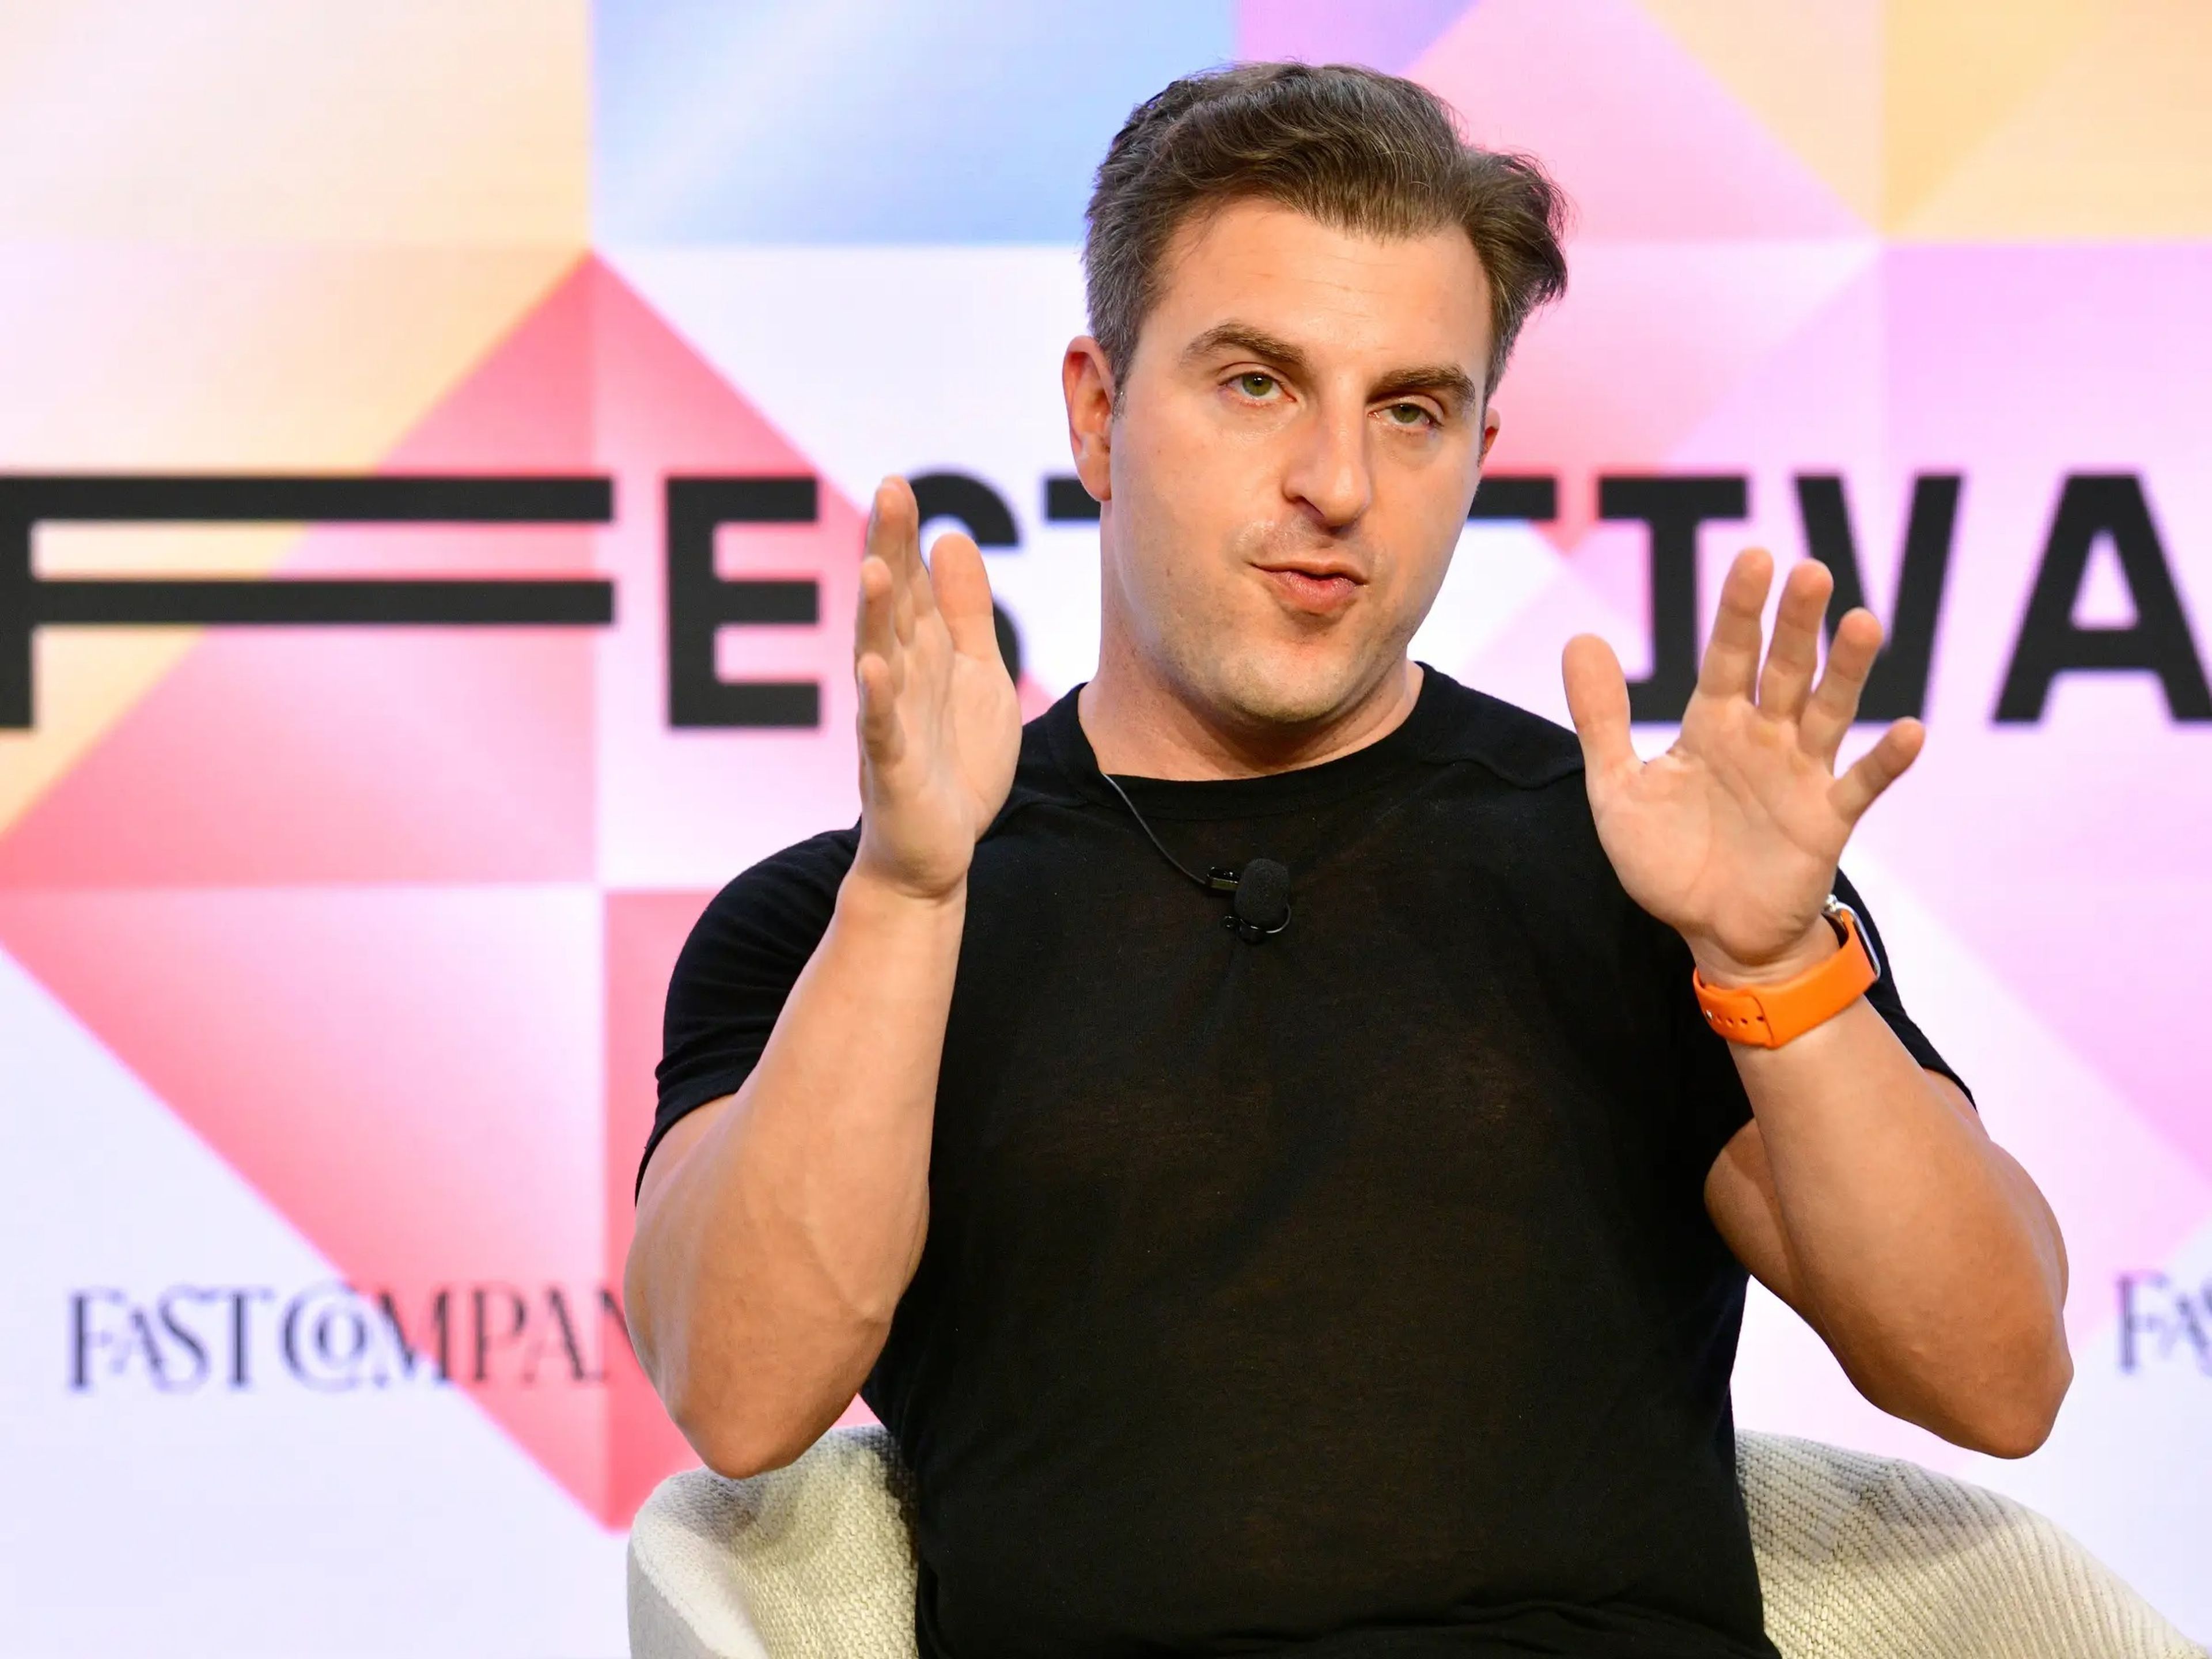 Brian Chesky gesturing with his hands in a black t-shirt in front of a pink, yellow, and blue screen.